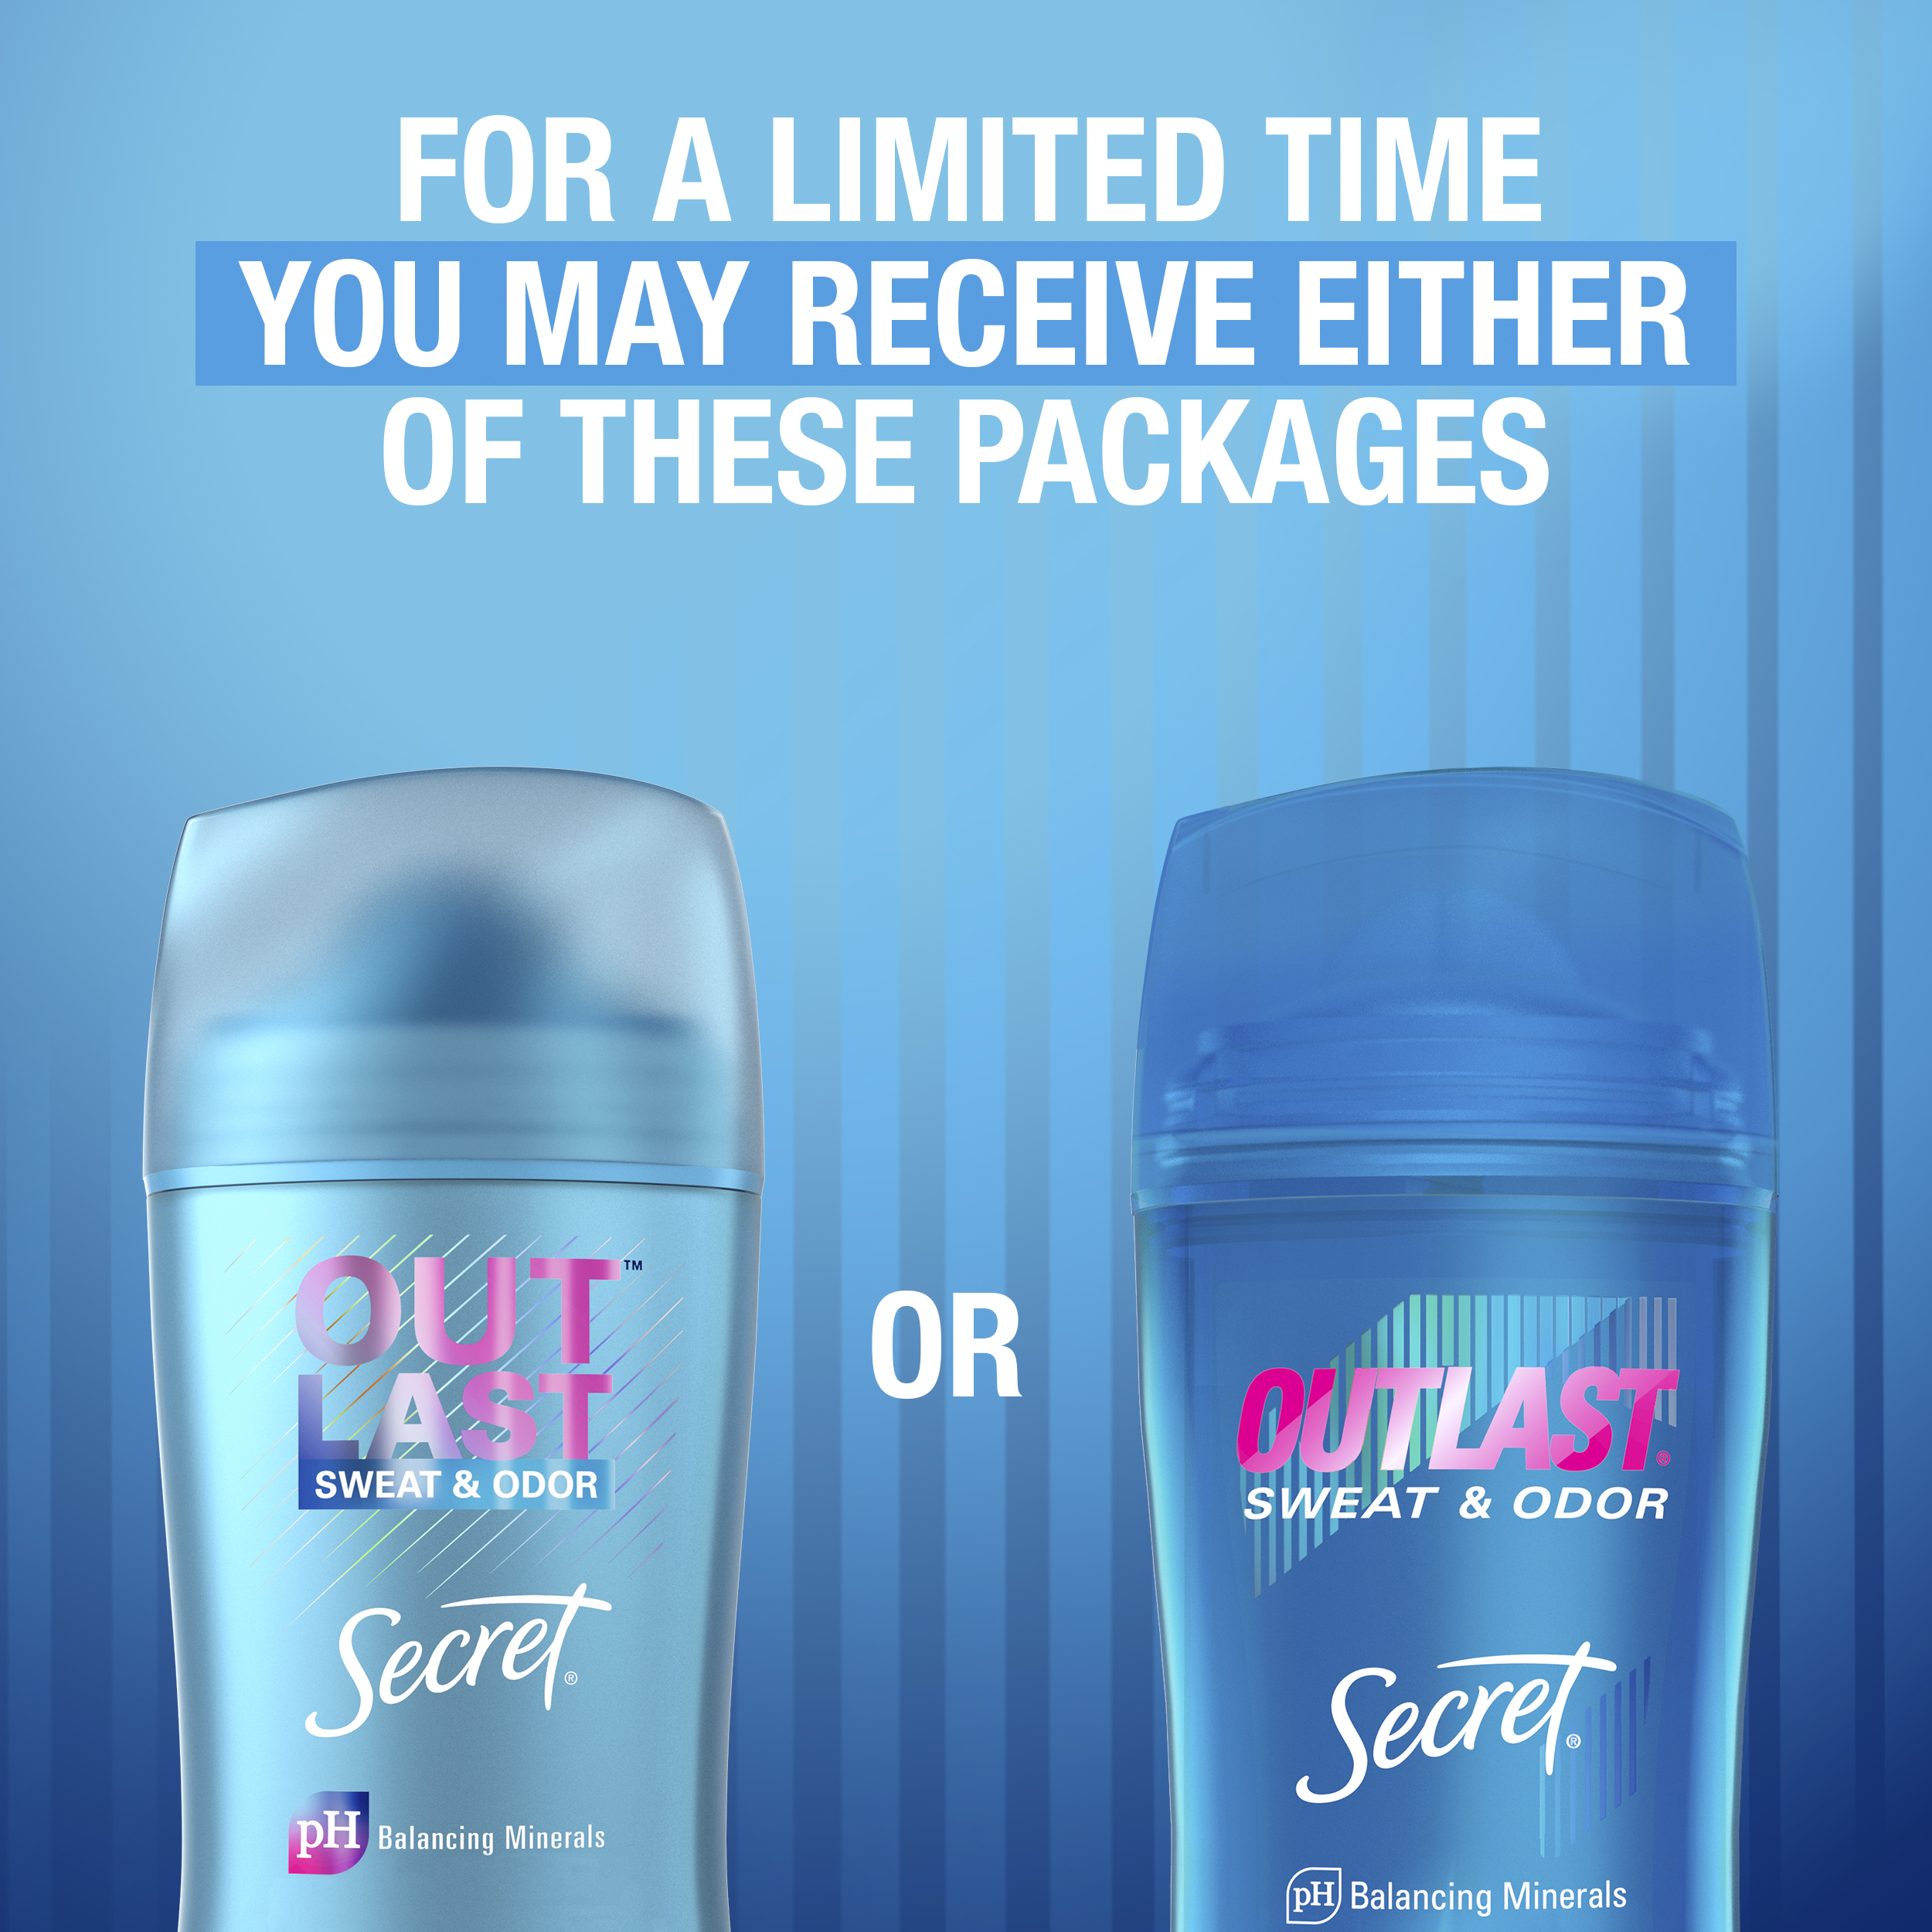 Secret Outlast Invisible Solid Antiperspirant and Deodorant Completely Clean, 2.6 oz Pack of 2 - image 7 of 9